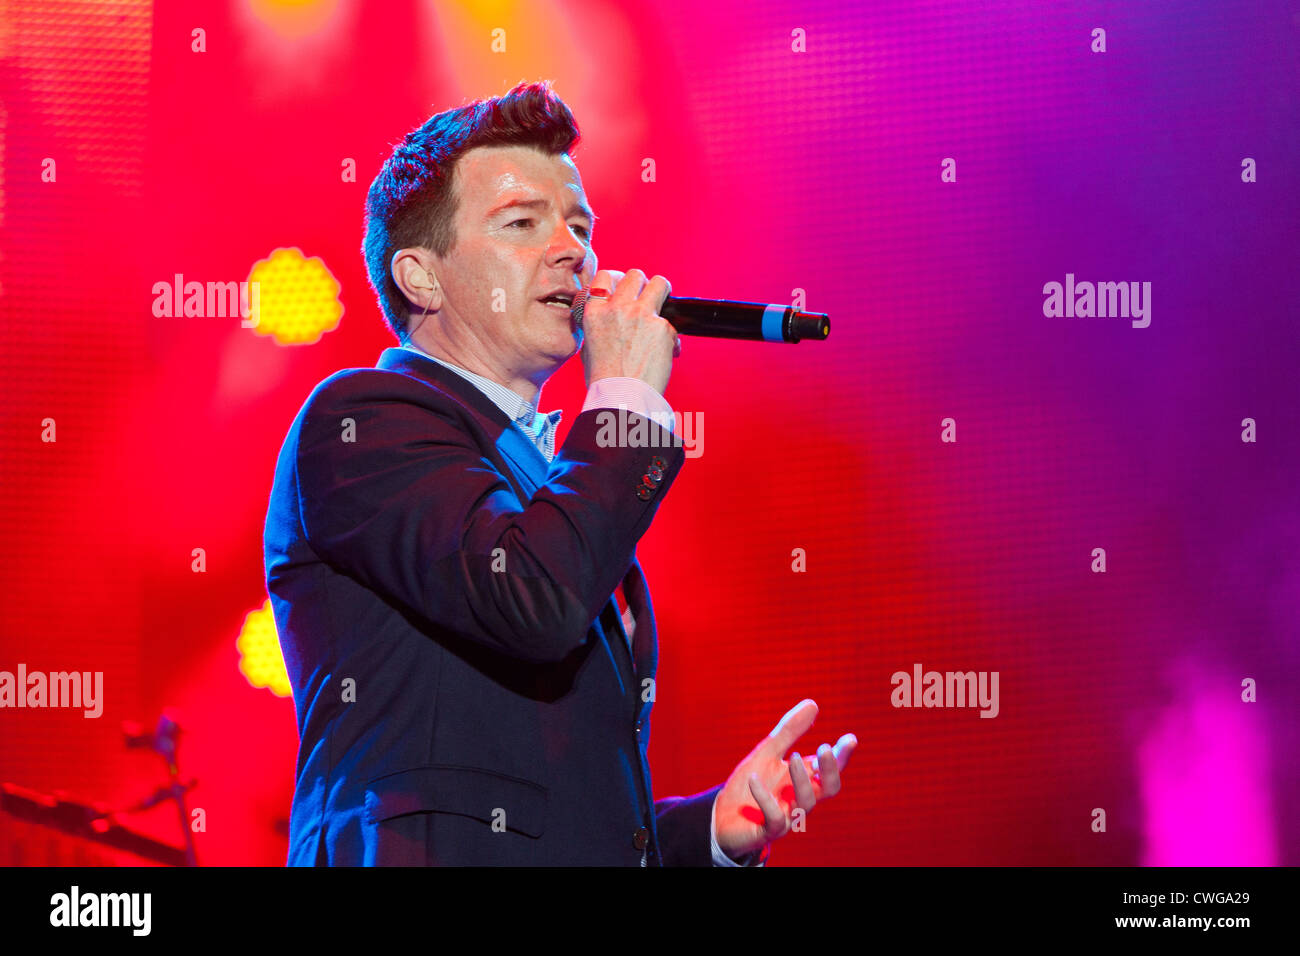 Singer Rick Astley performing on stage at the Rewind Festival Henley on Thames 2012. PER0267 Stock Photo